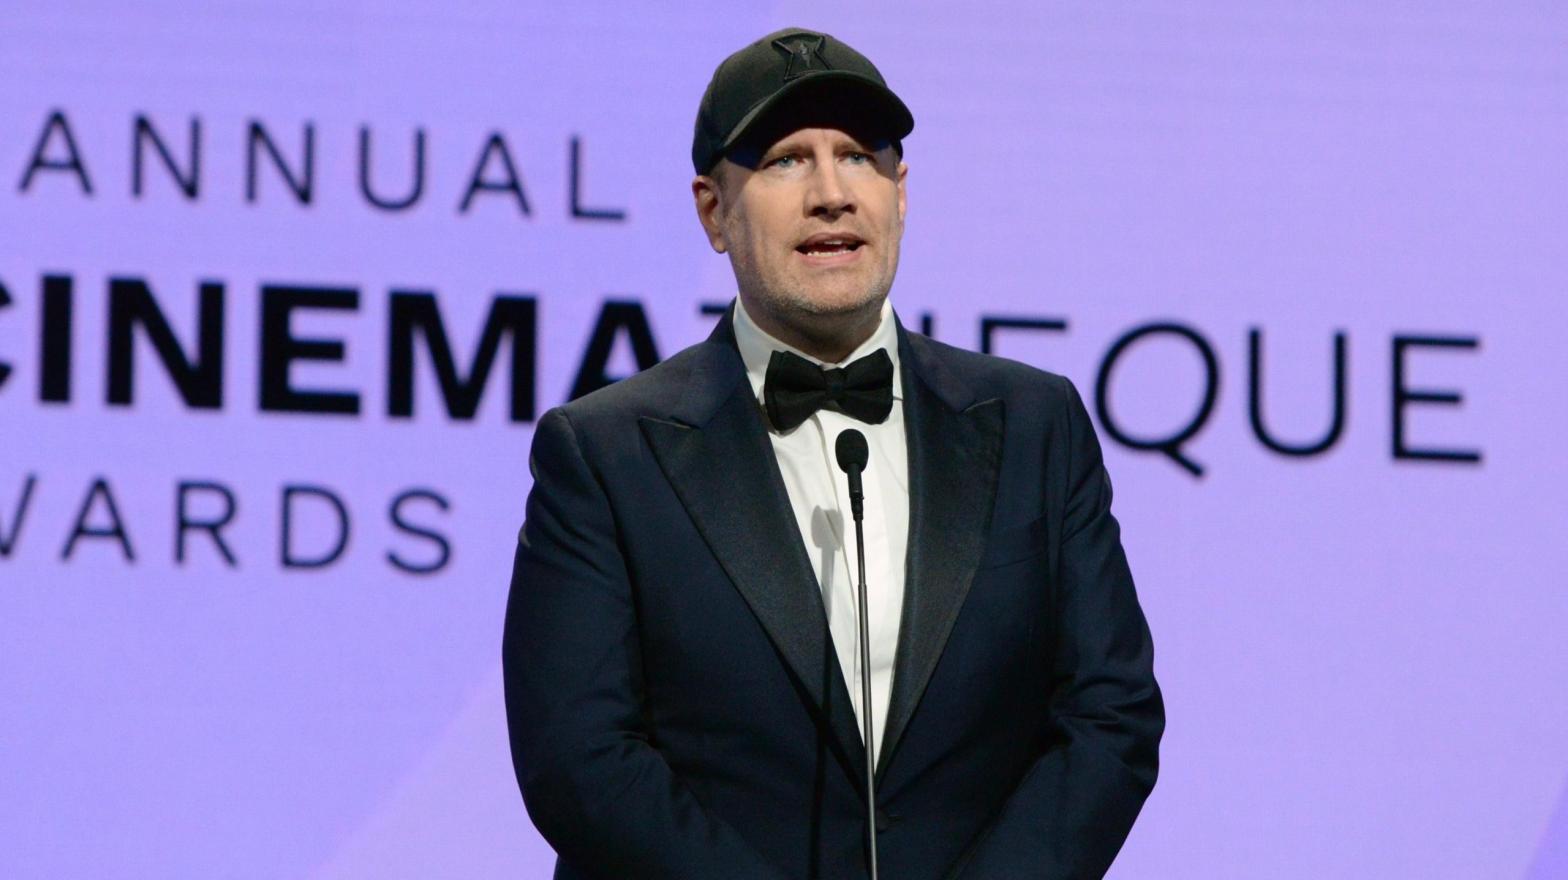 Kevin Feige onstage during the 35th Annual American Cinematheque Awards on November 18, 2021 in Beverly Hills, California. (Photo: Vivien Killilea, Getty Images)